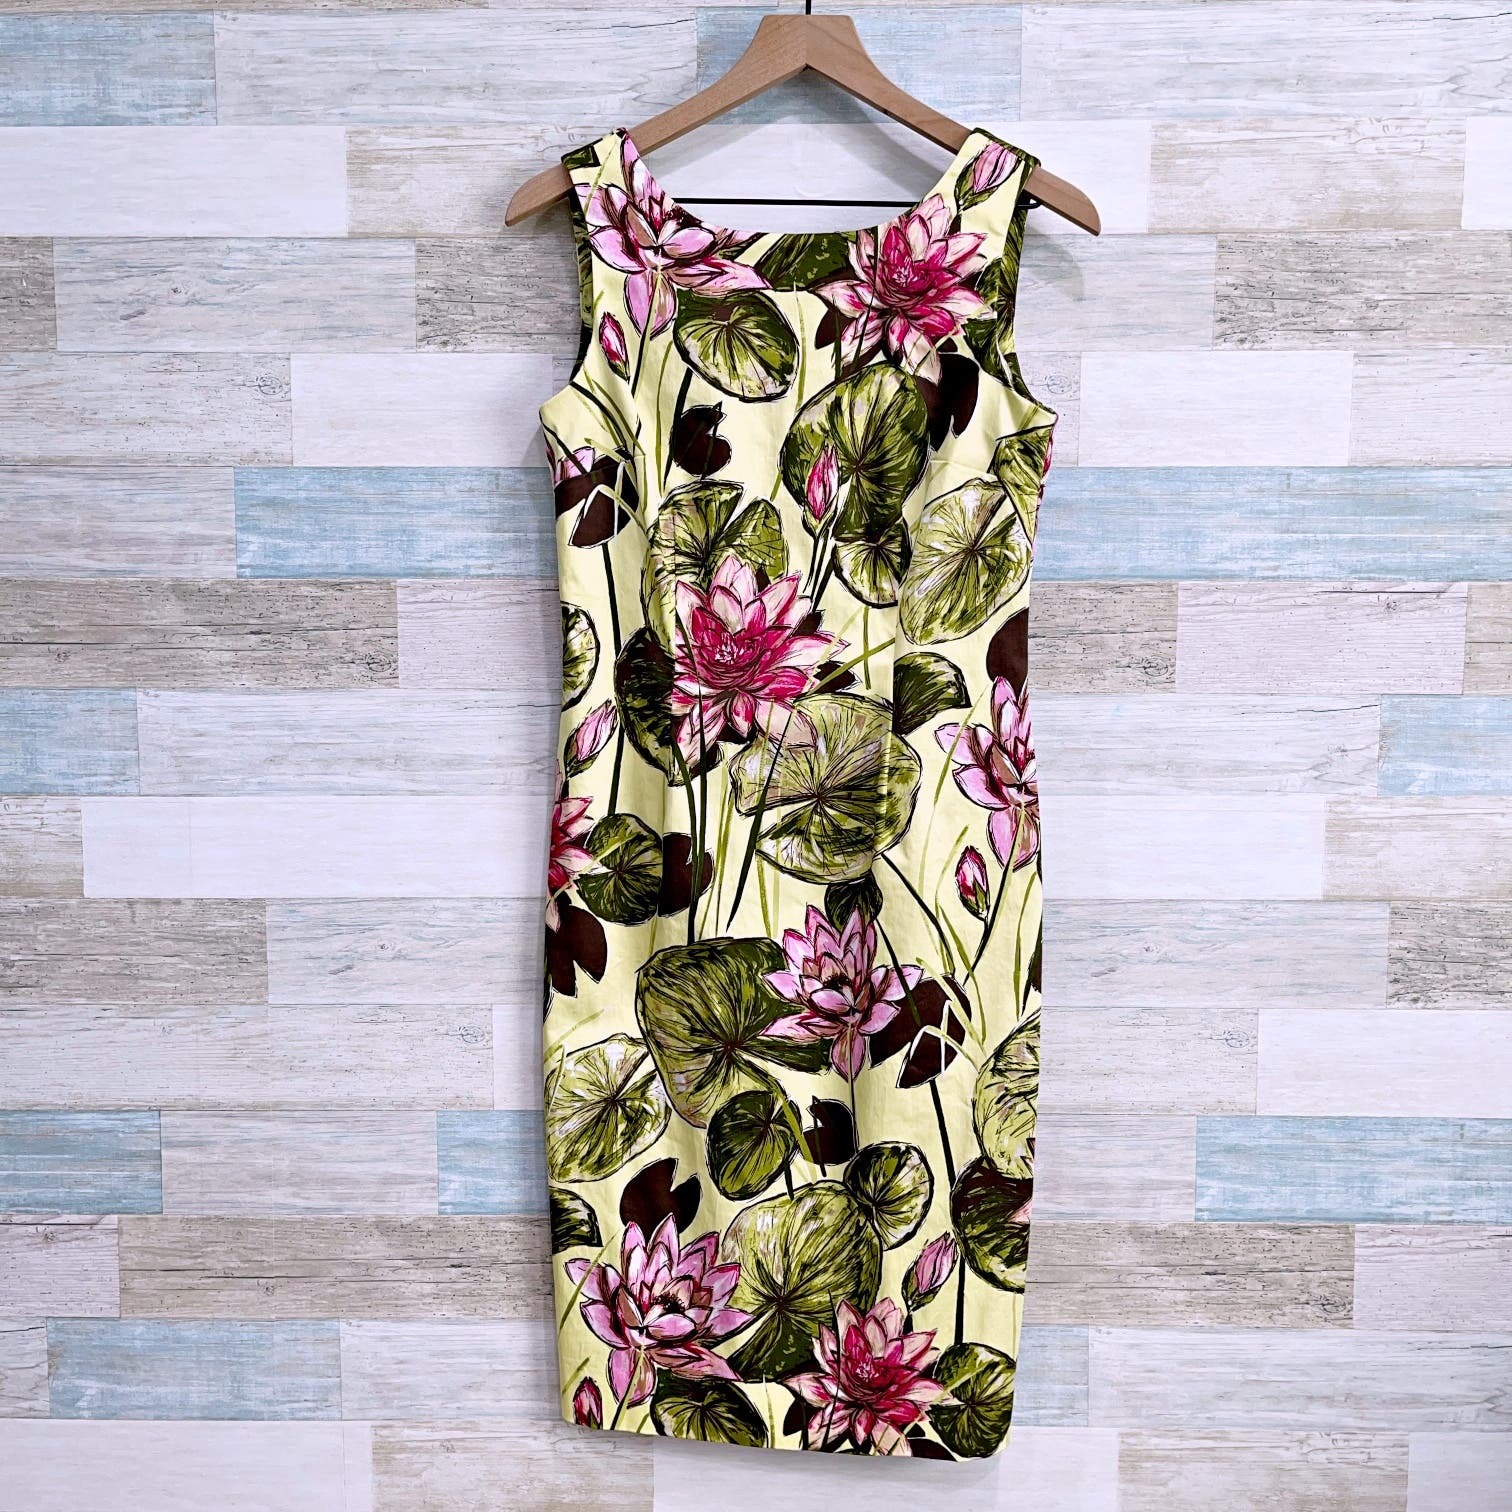 Primary image for Talbots Vintage Floral Sheath Dress Green Pink Stretch Cotton USA Womens 4